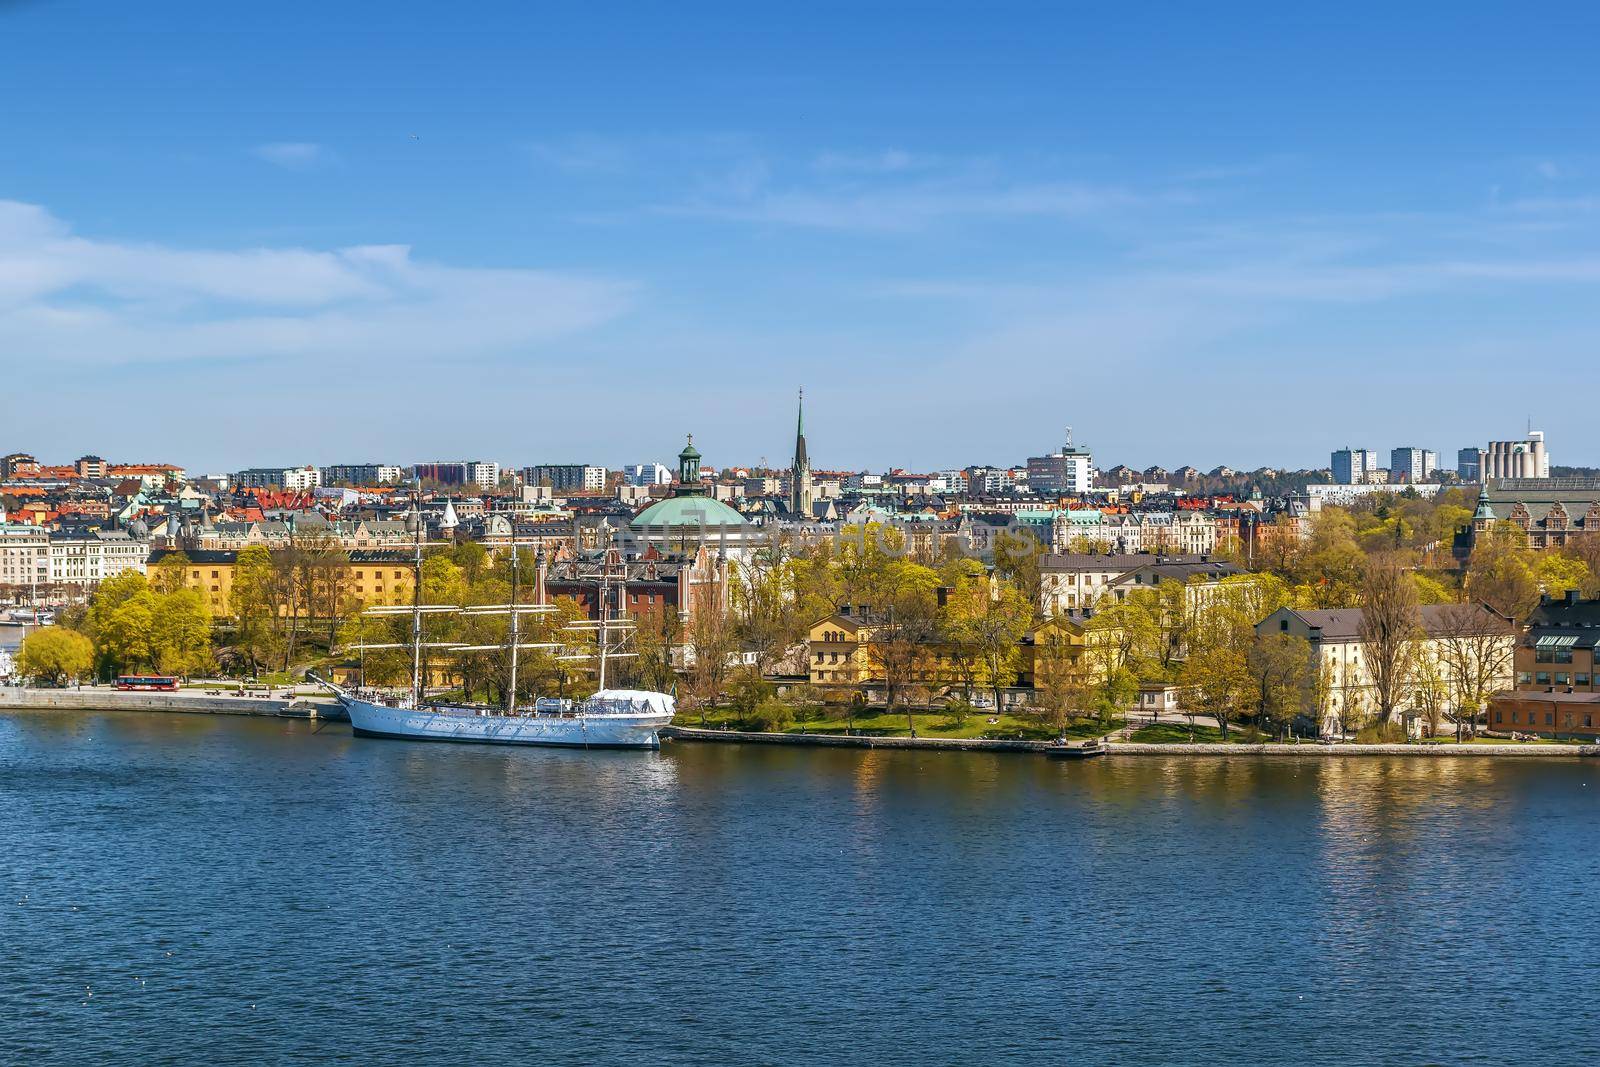 View of Stockholm, Sweden by borisb17